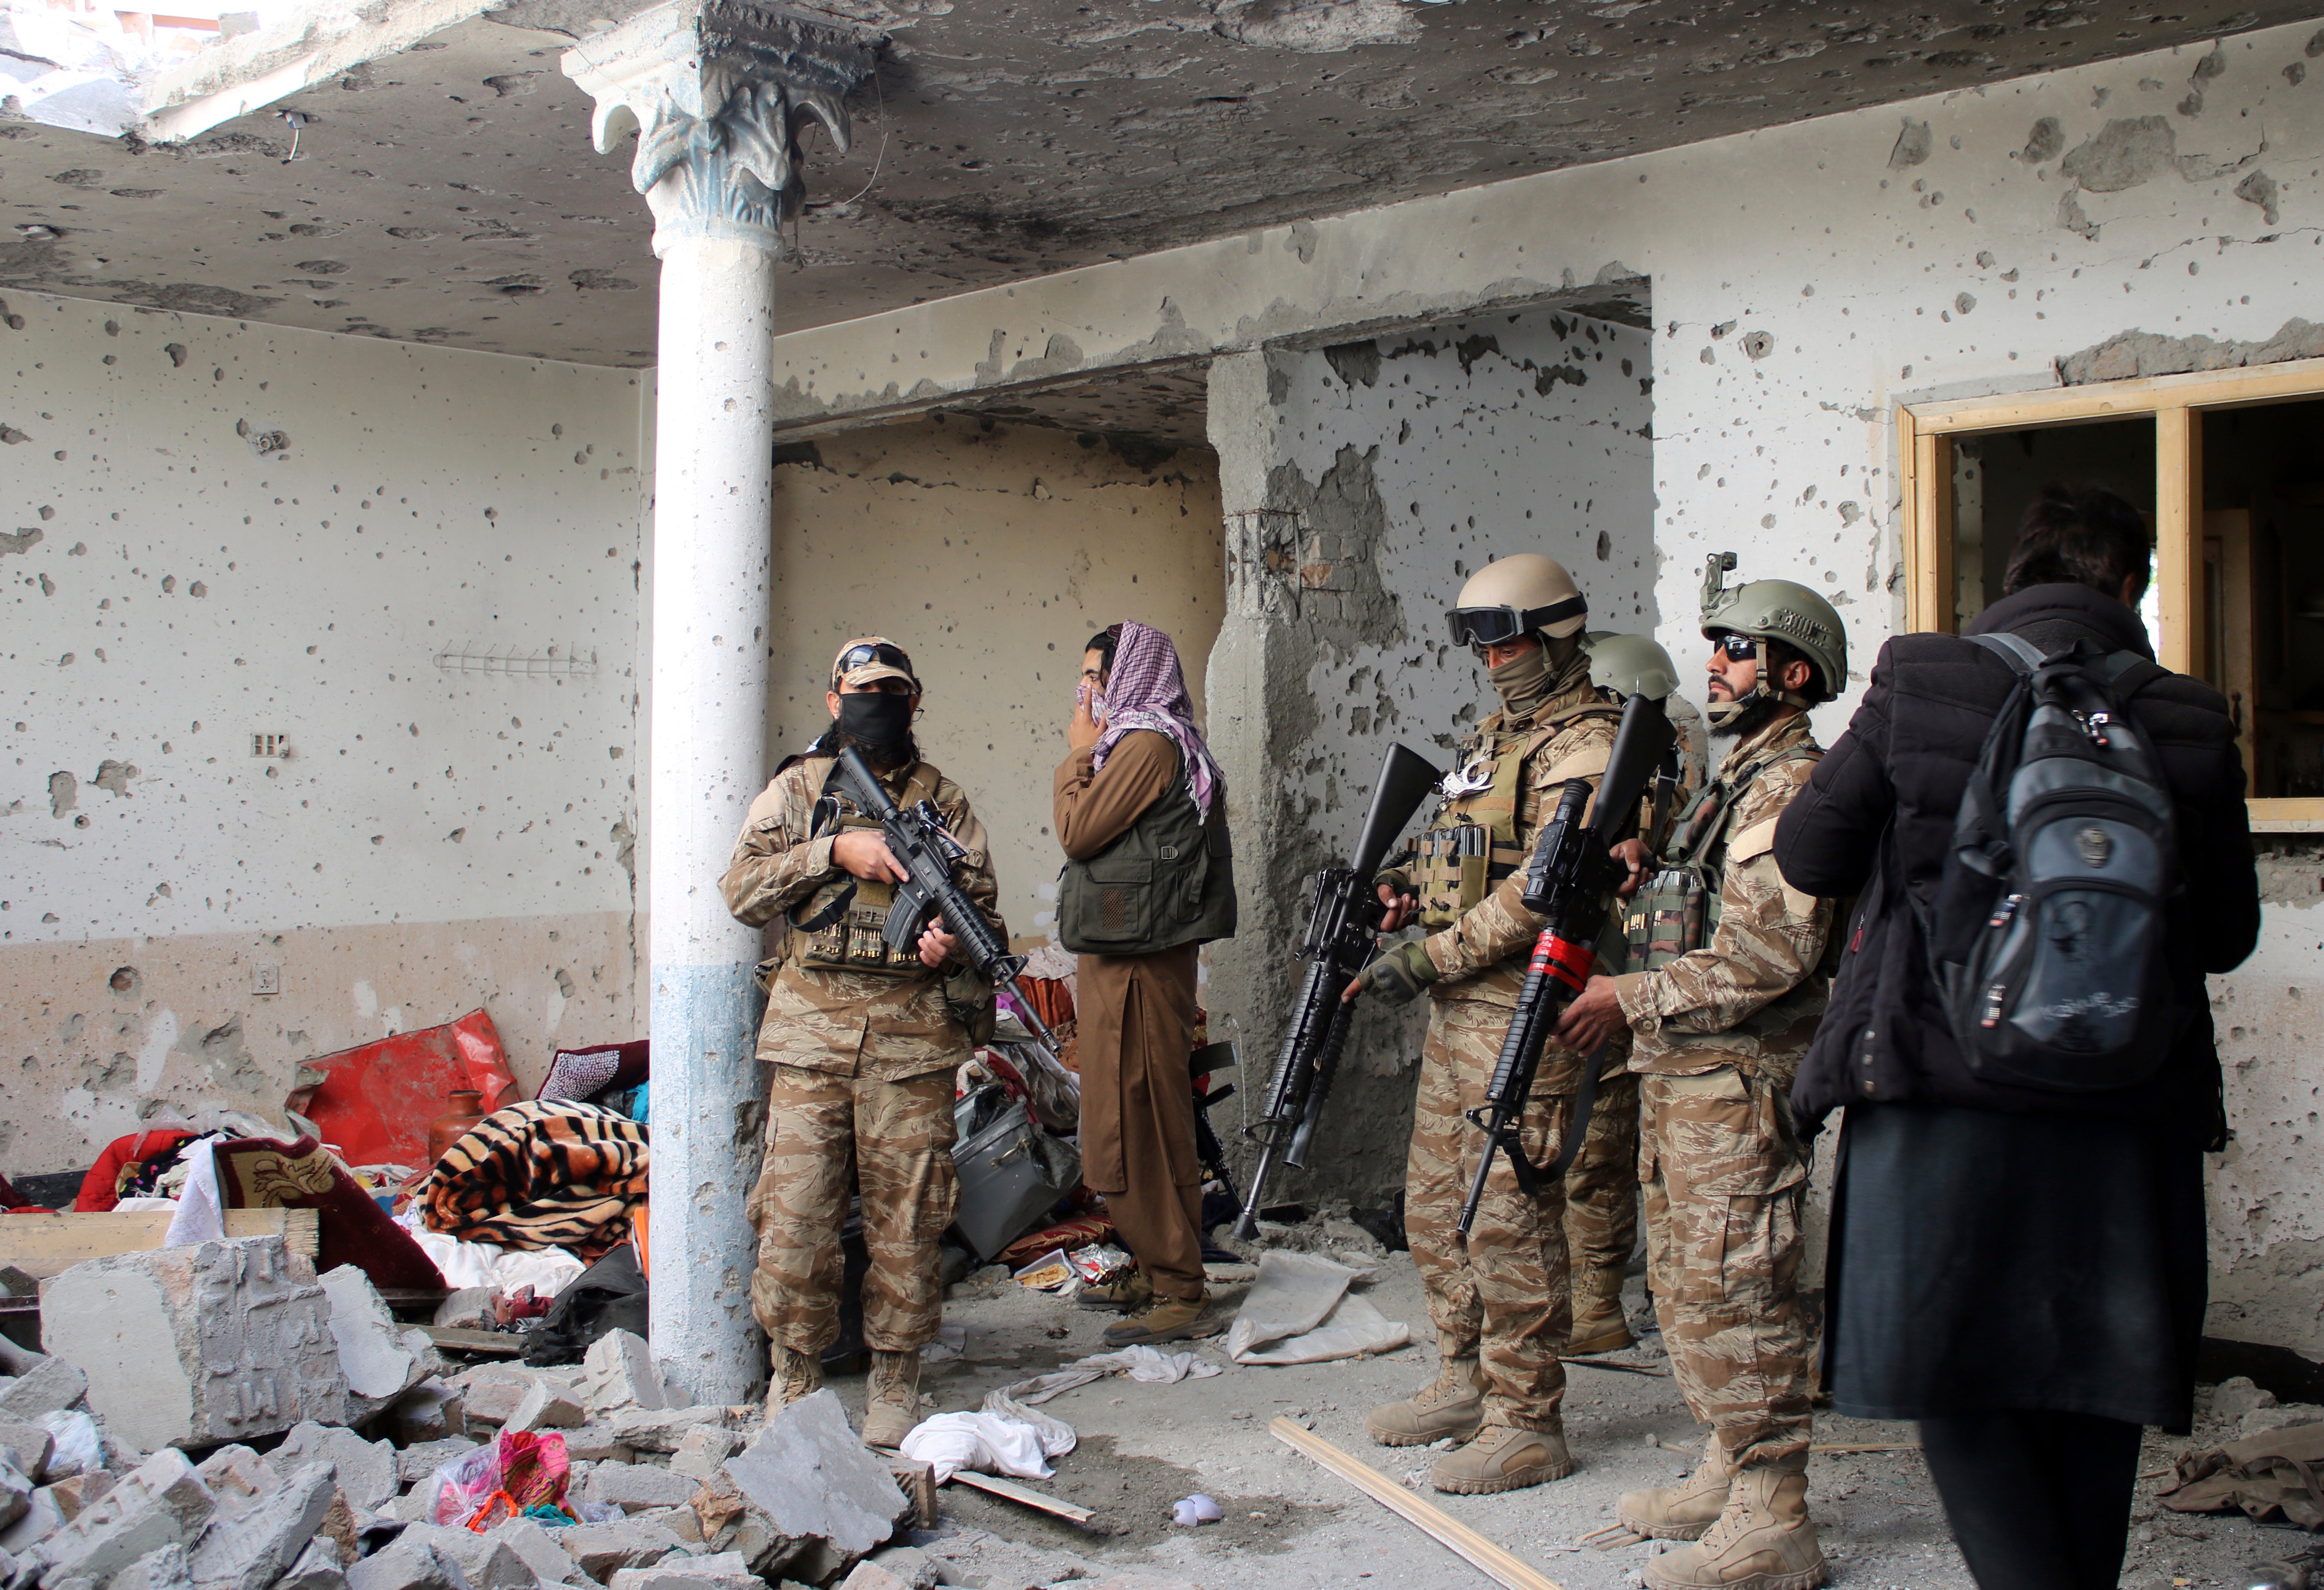 Taliban fighters inspect a house following a gun-battle with Islamic State fighters